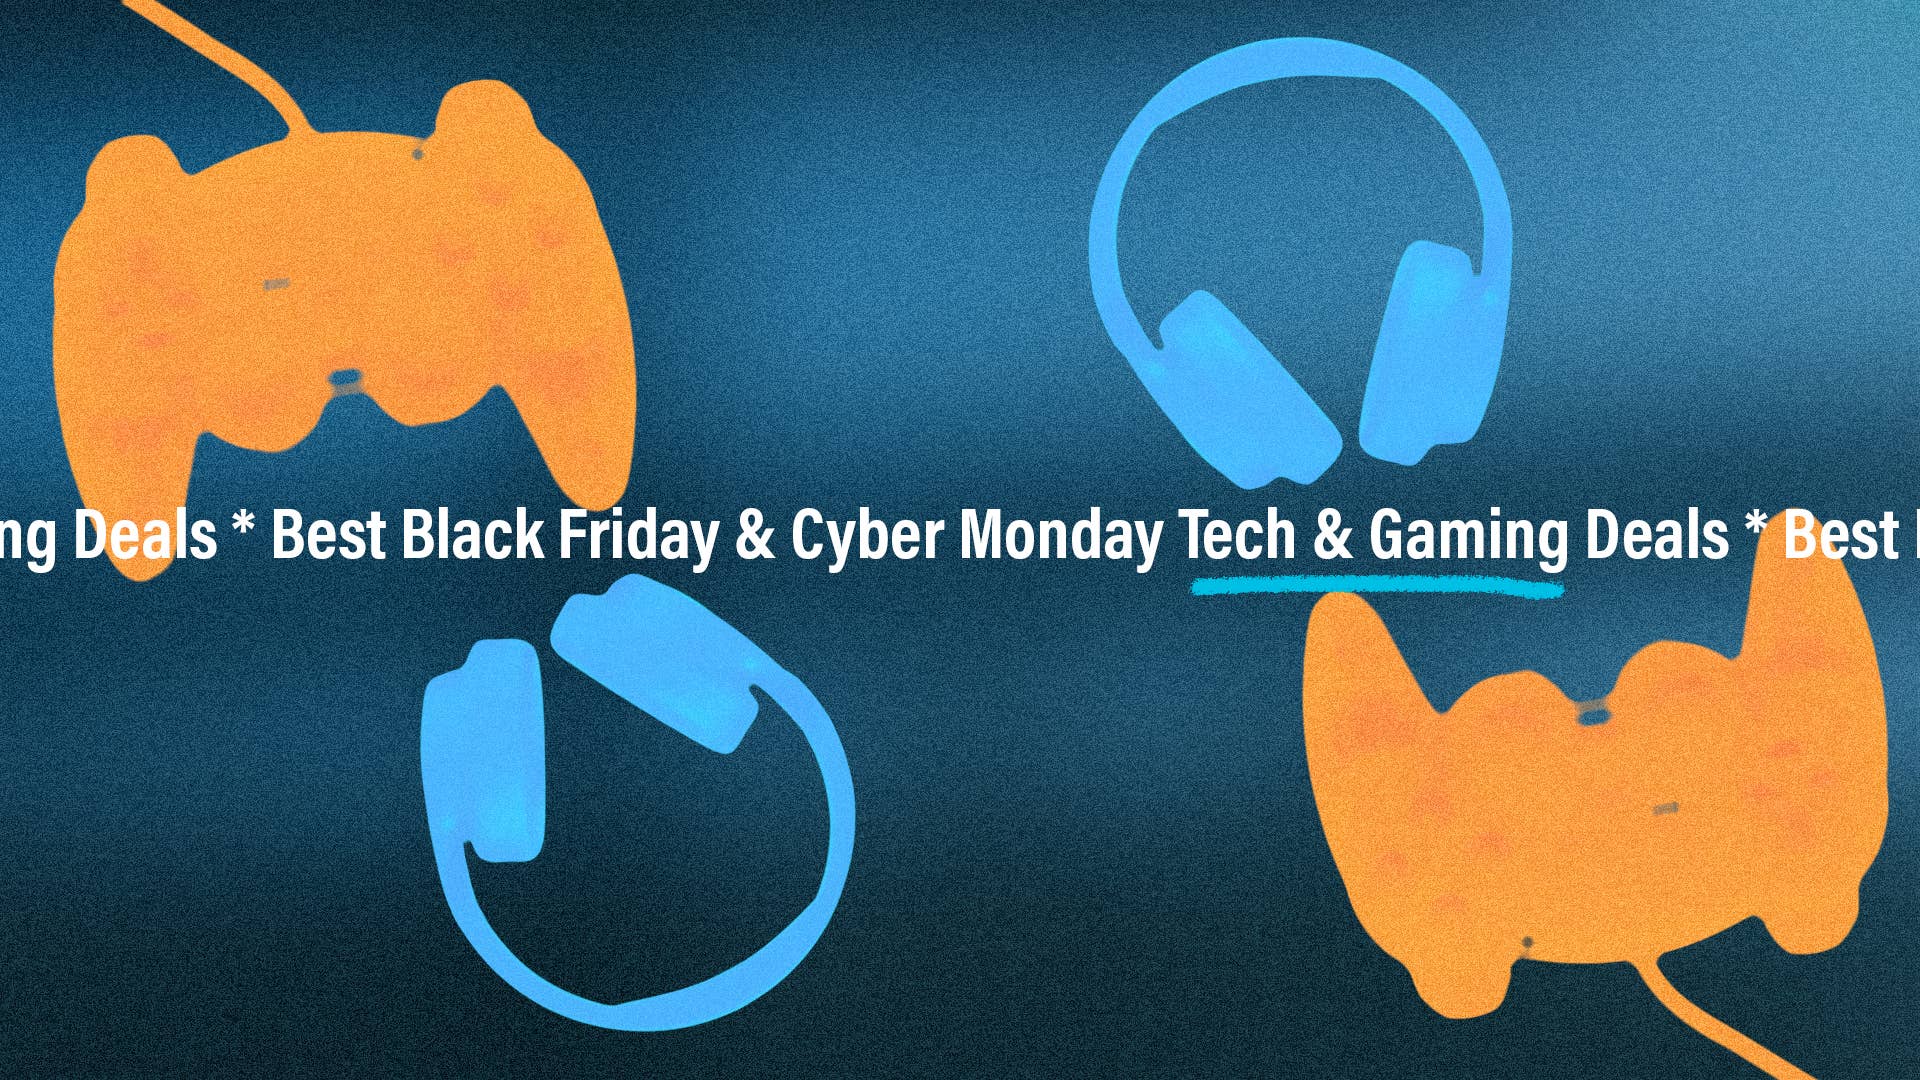 Best PS5 Cyber Monday Deals: Pricing, Games, Availability, Buy Online